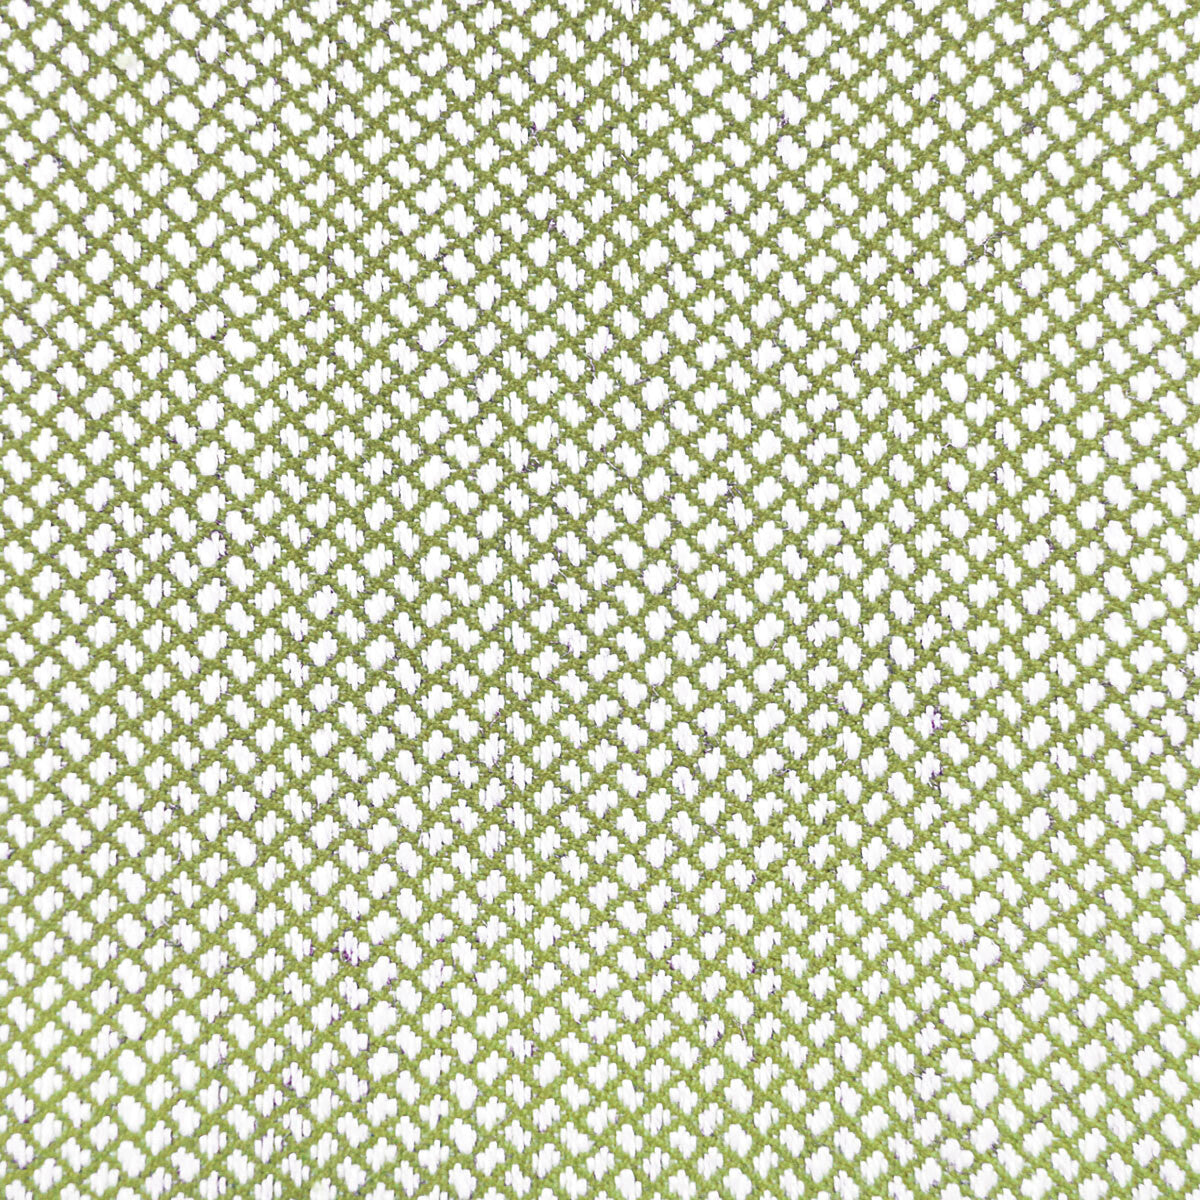 Sabuki fabric in verde color - pattern GDT5638.006.0 - by Gaston y Daniela in the Gaston Japon collection